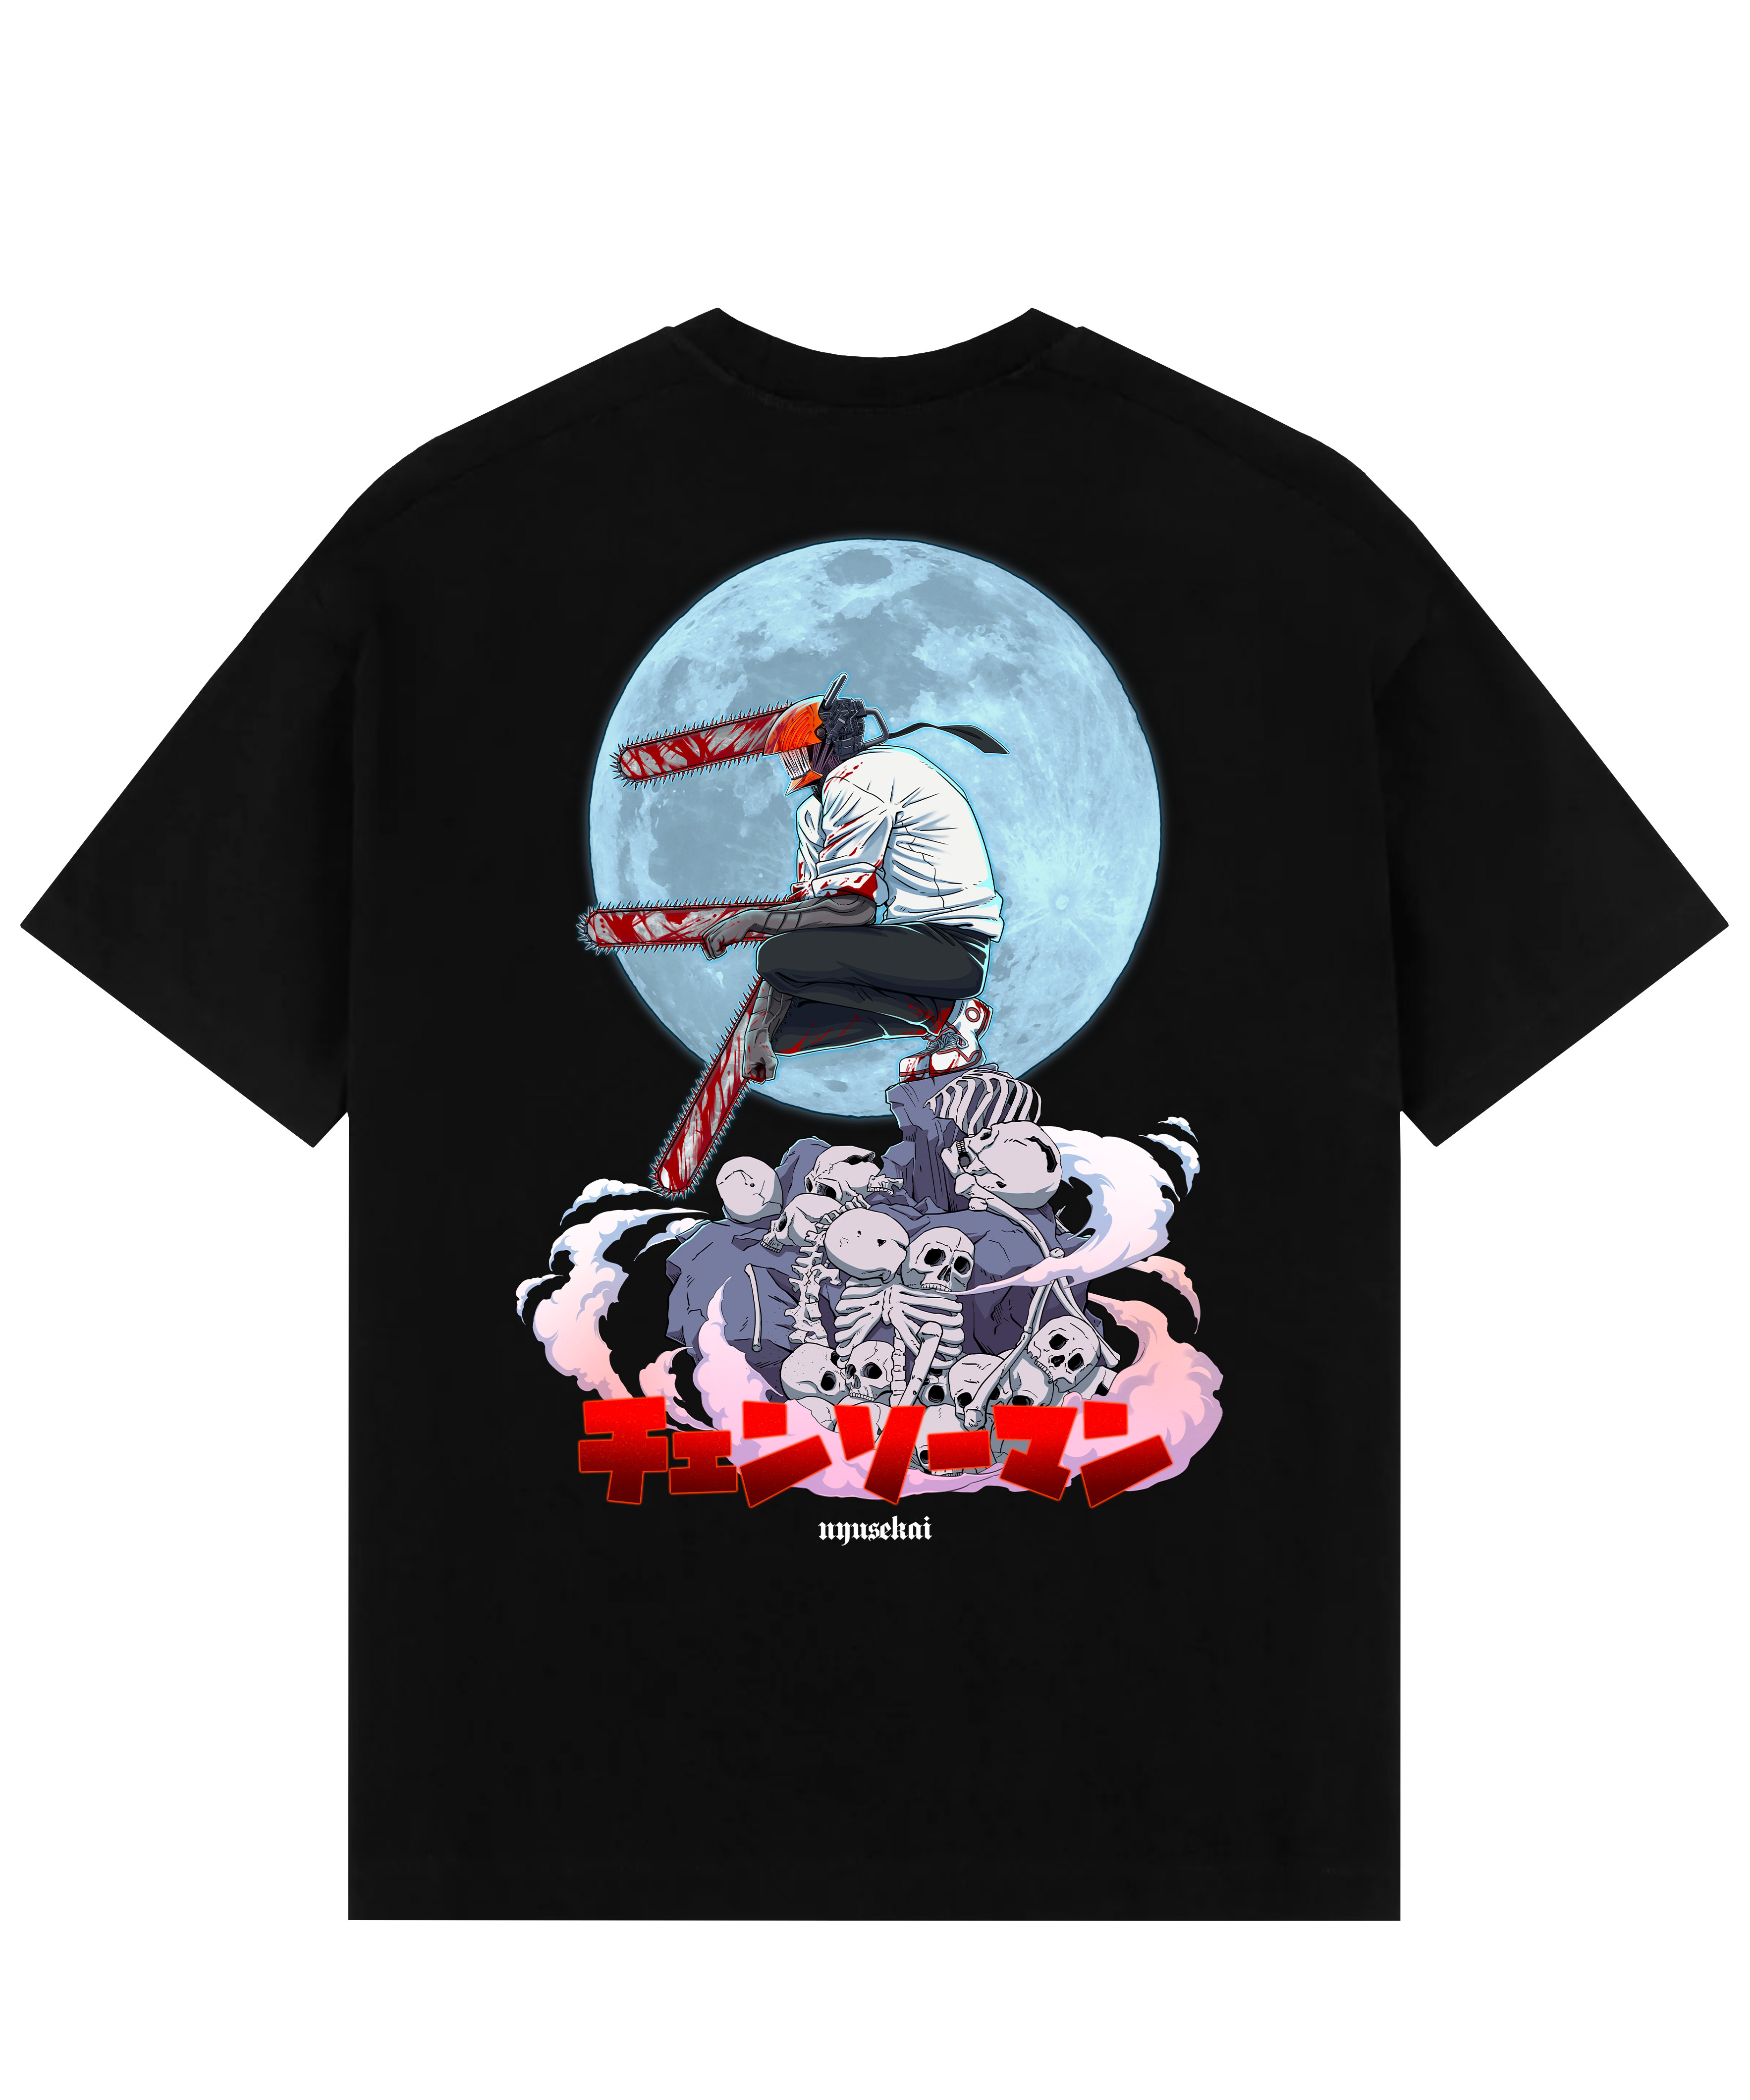 "Chainsaw Devil x King of Hell - Chainsaw Man" Oversize T-Shirt